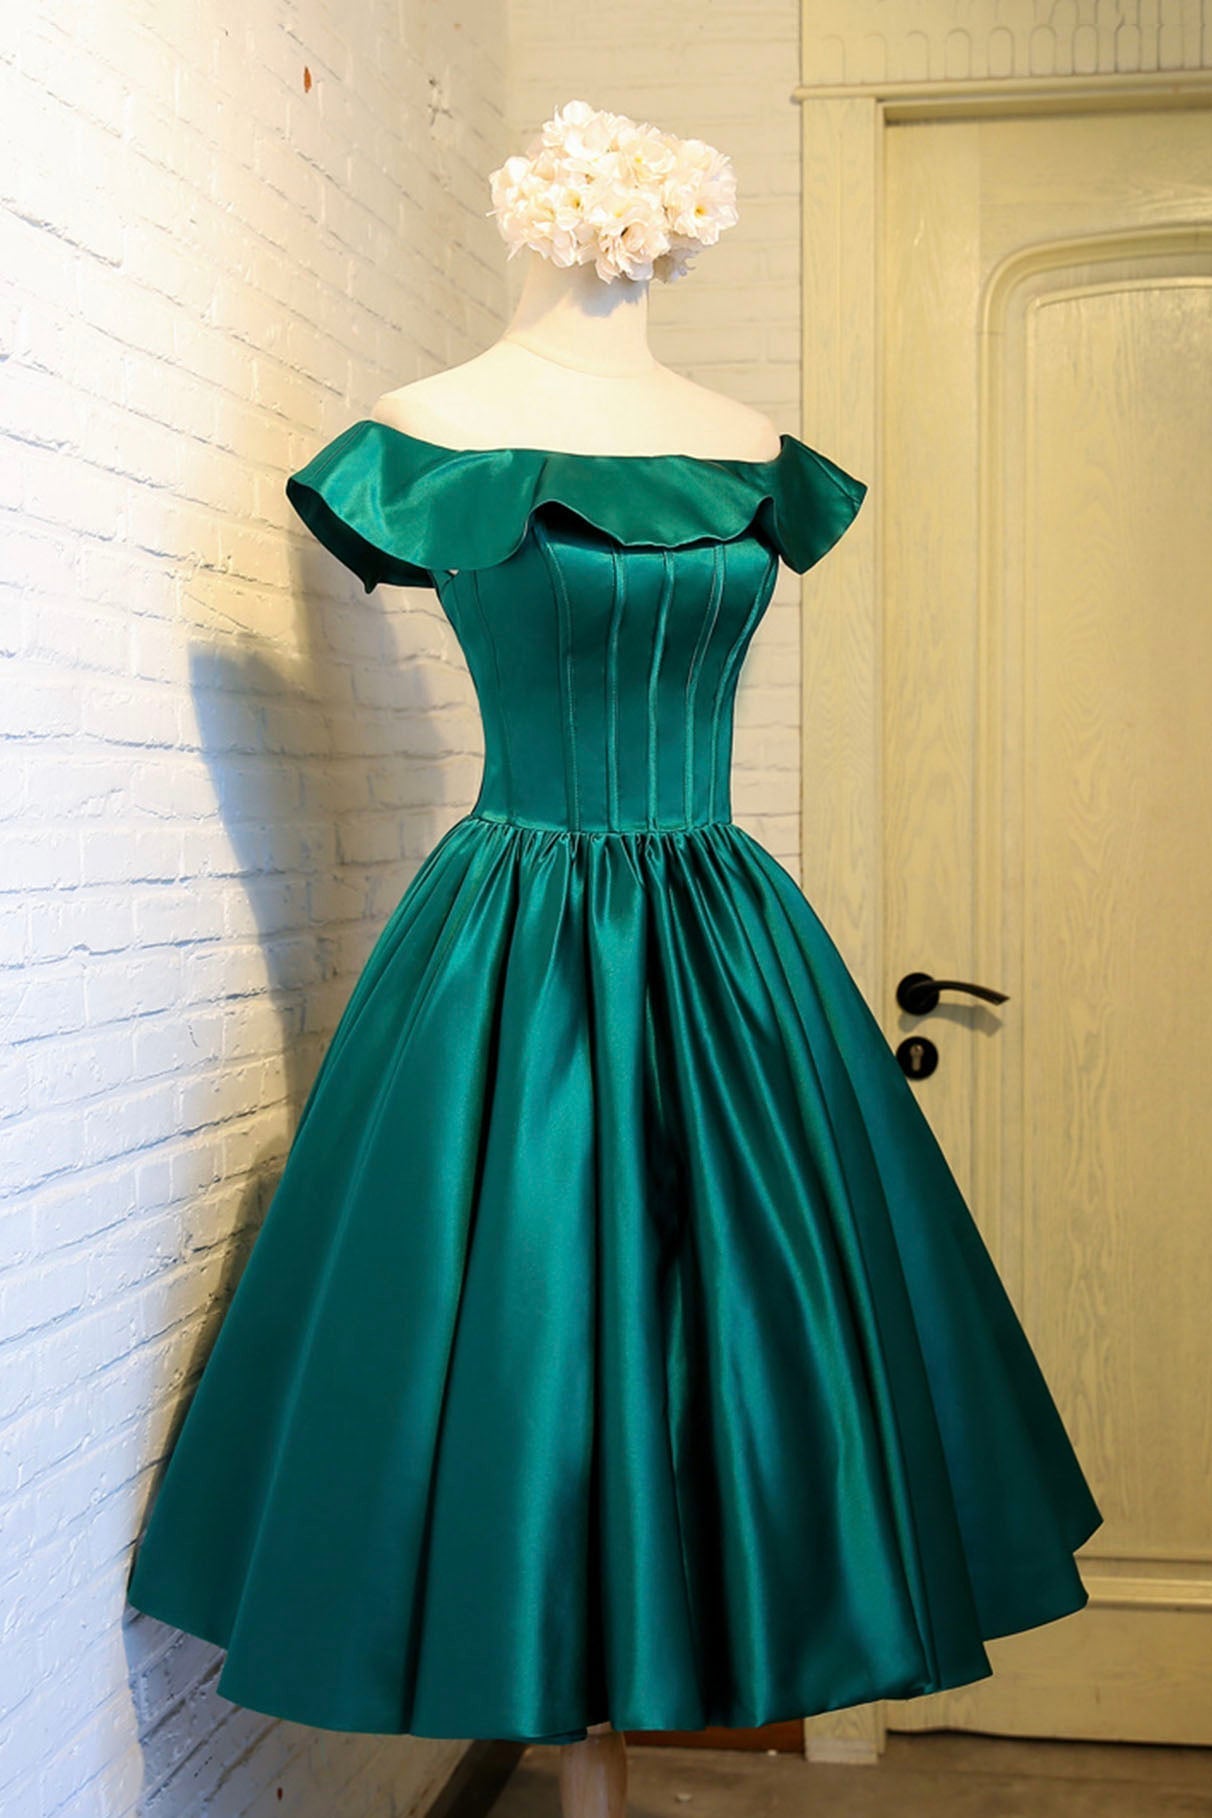 Green Satin Short Homecoming Dress Outfits For Girls, Cute Off the Shoulder Knee Length Prom Dress